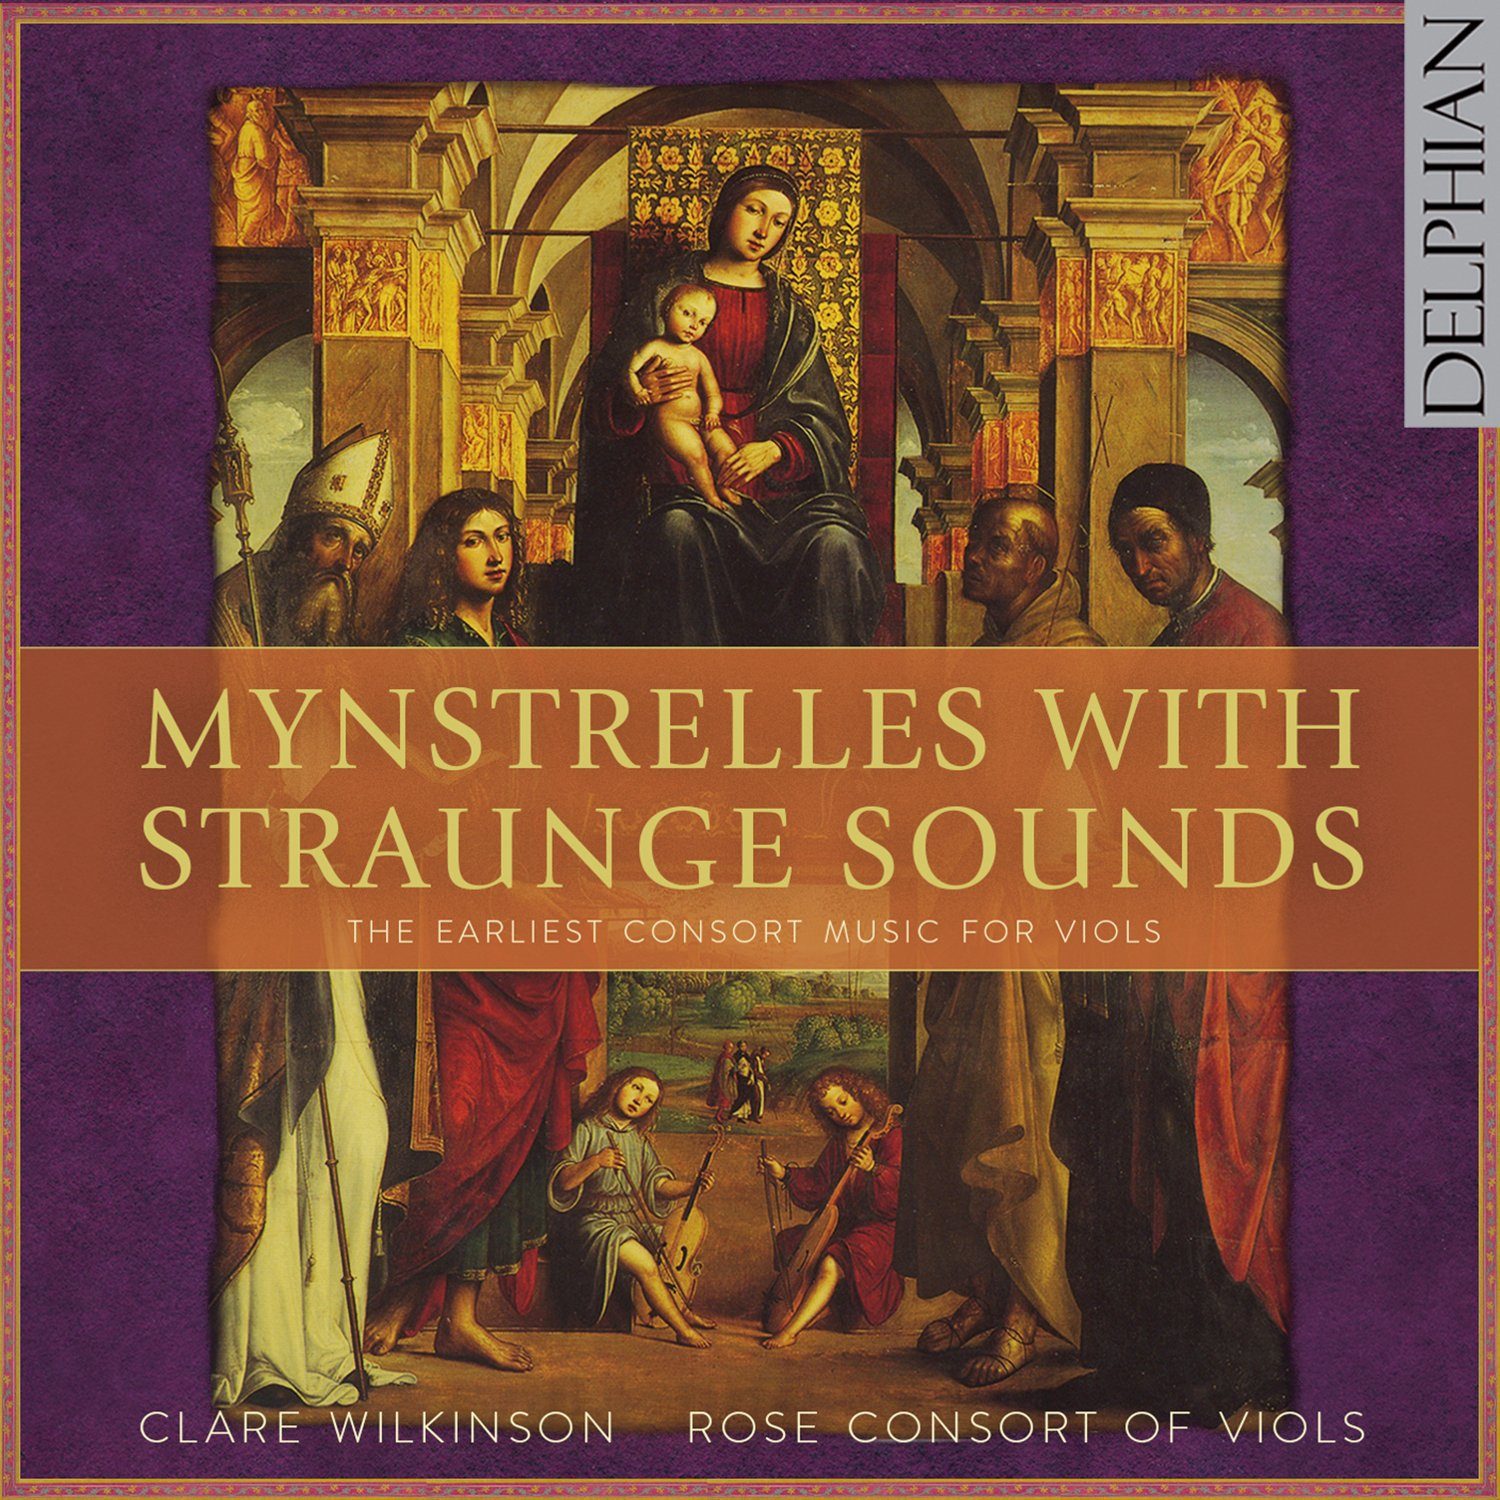 Mynstrelles with Straunge Sounds: the earliest consort music for viols